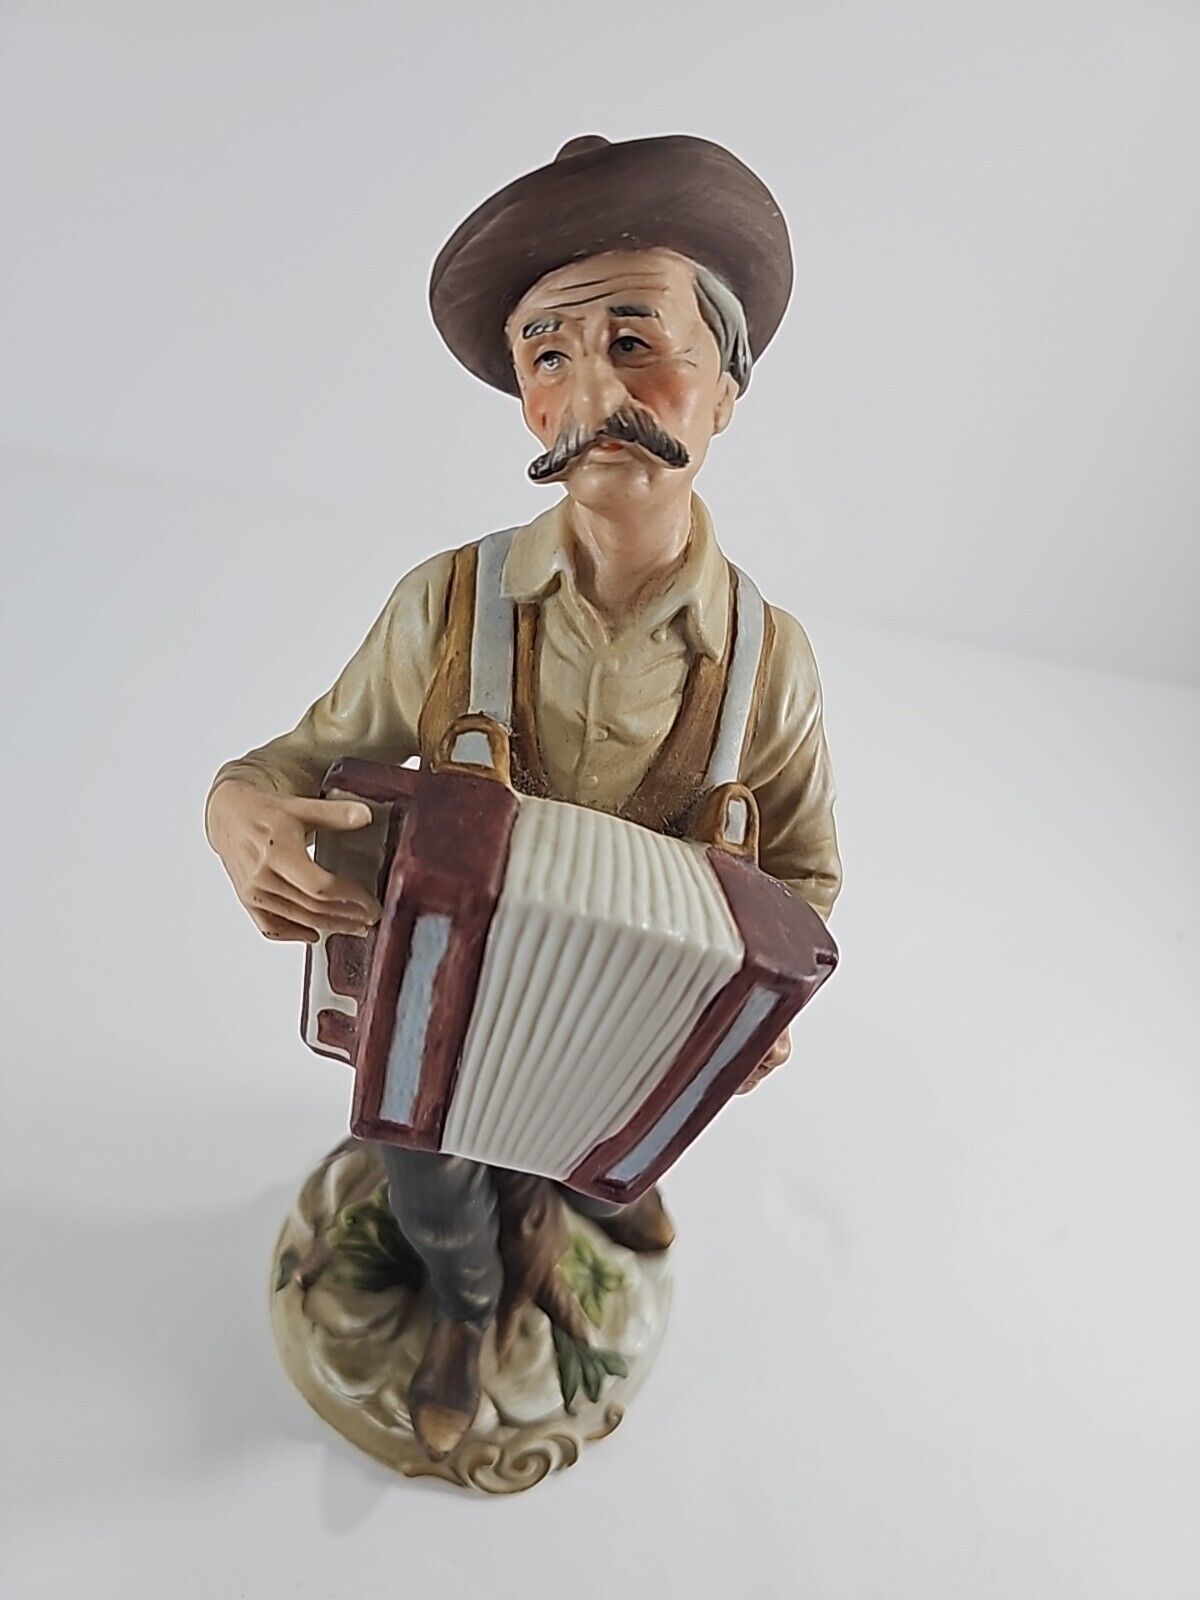 Vintage Old World Man Musician Playing The Accordion Porcelain Figurine 11 Inch